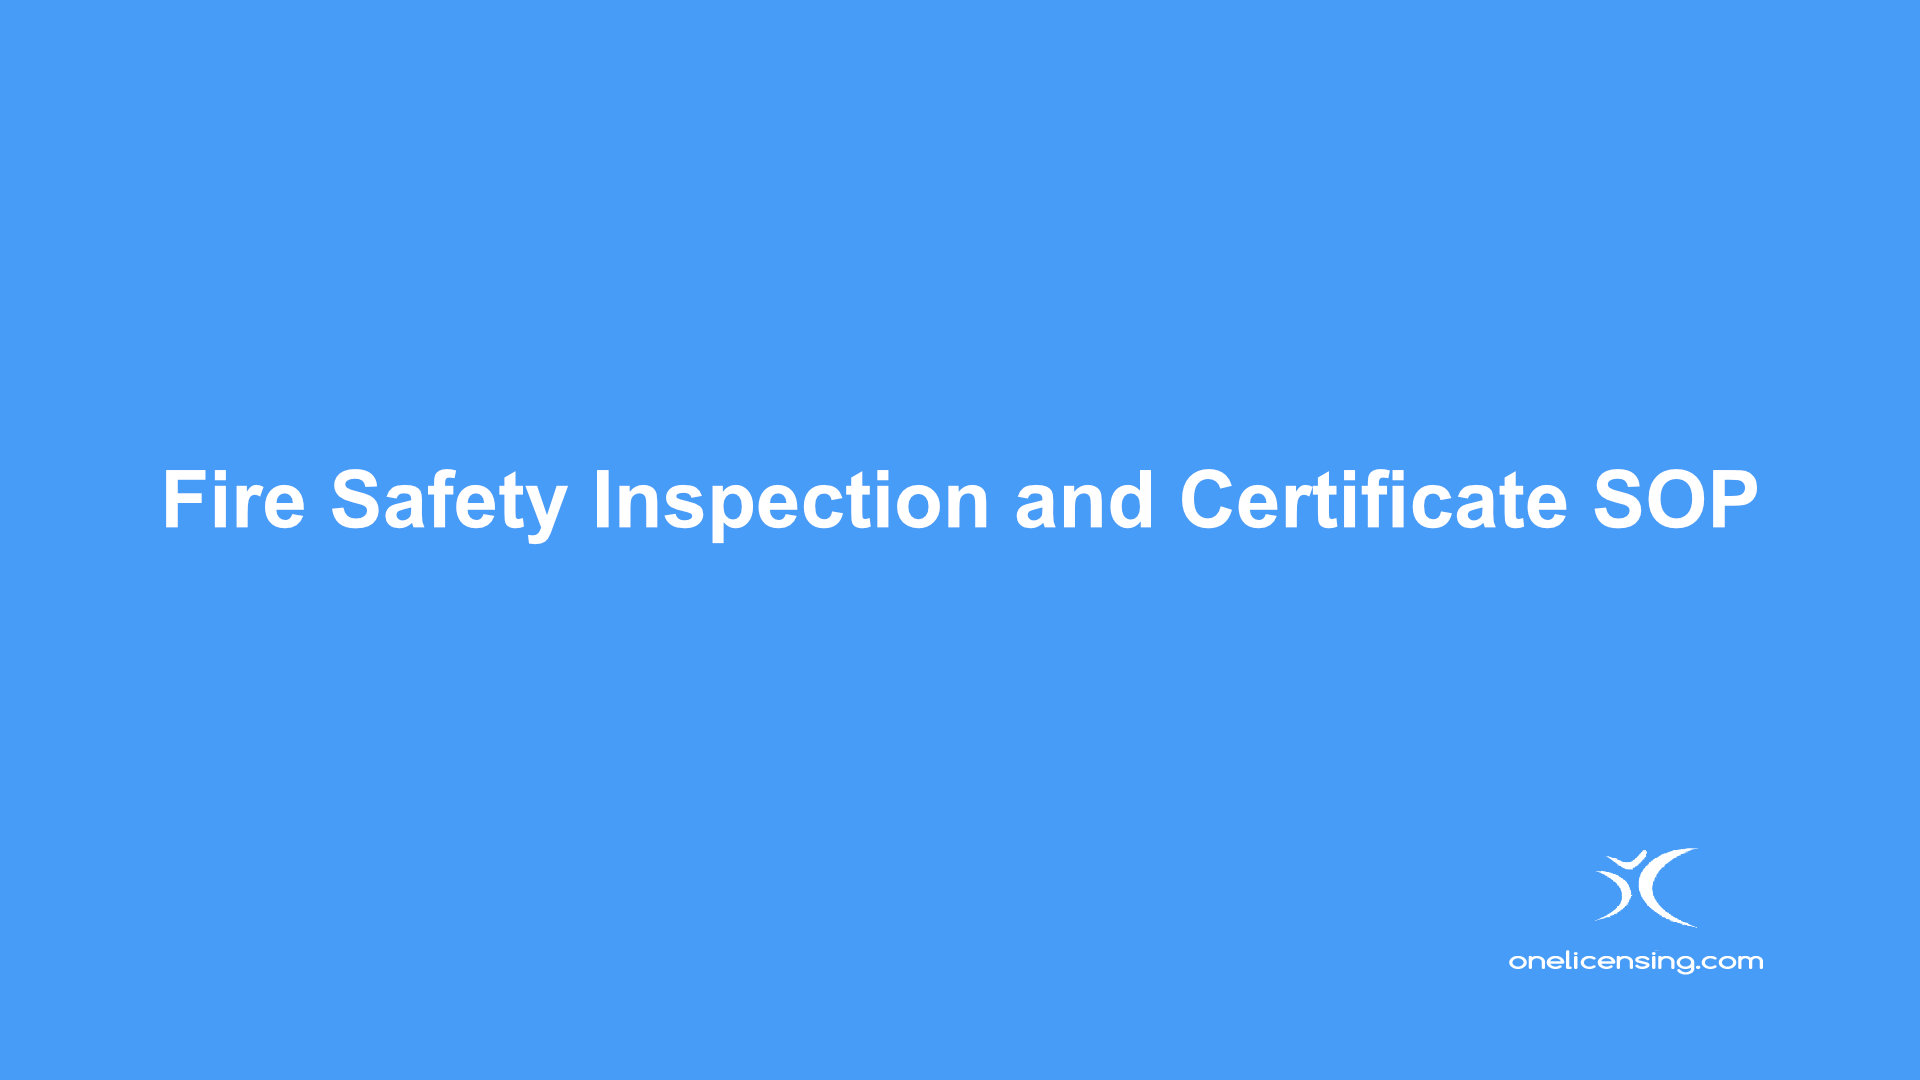 Fire Safety Inspection and Certificate SOP